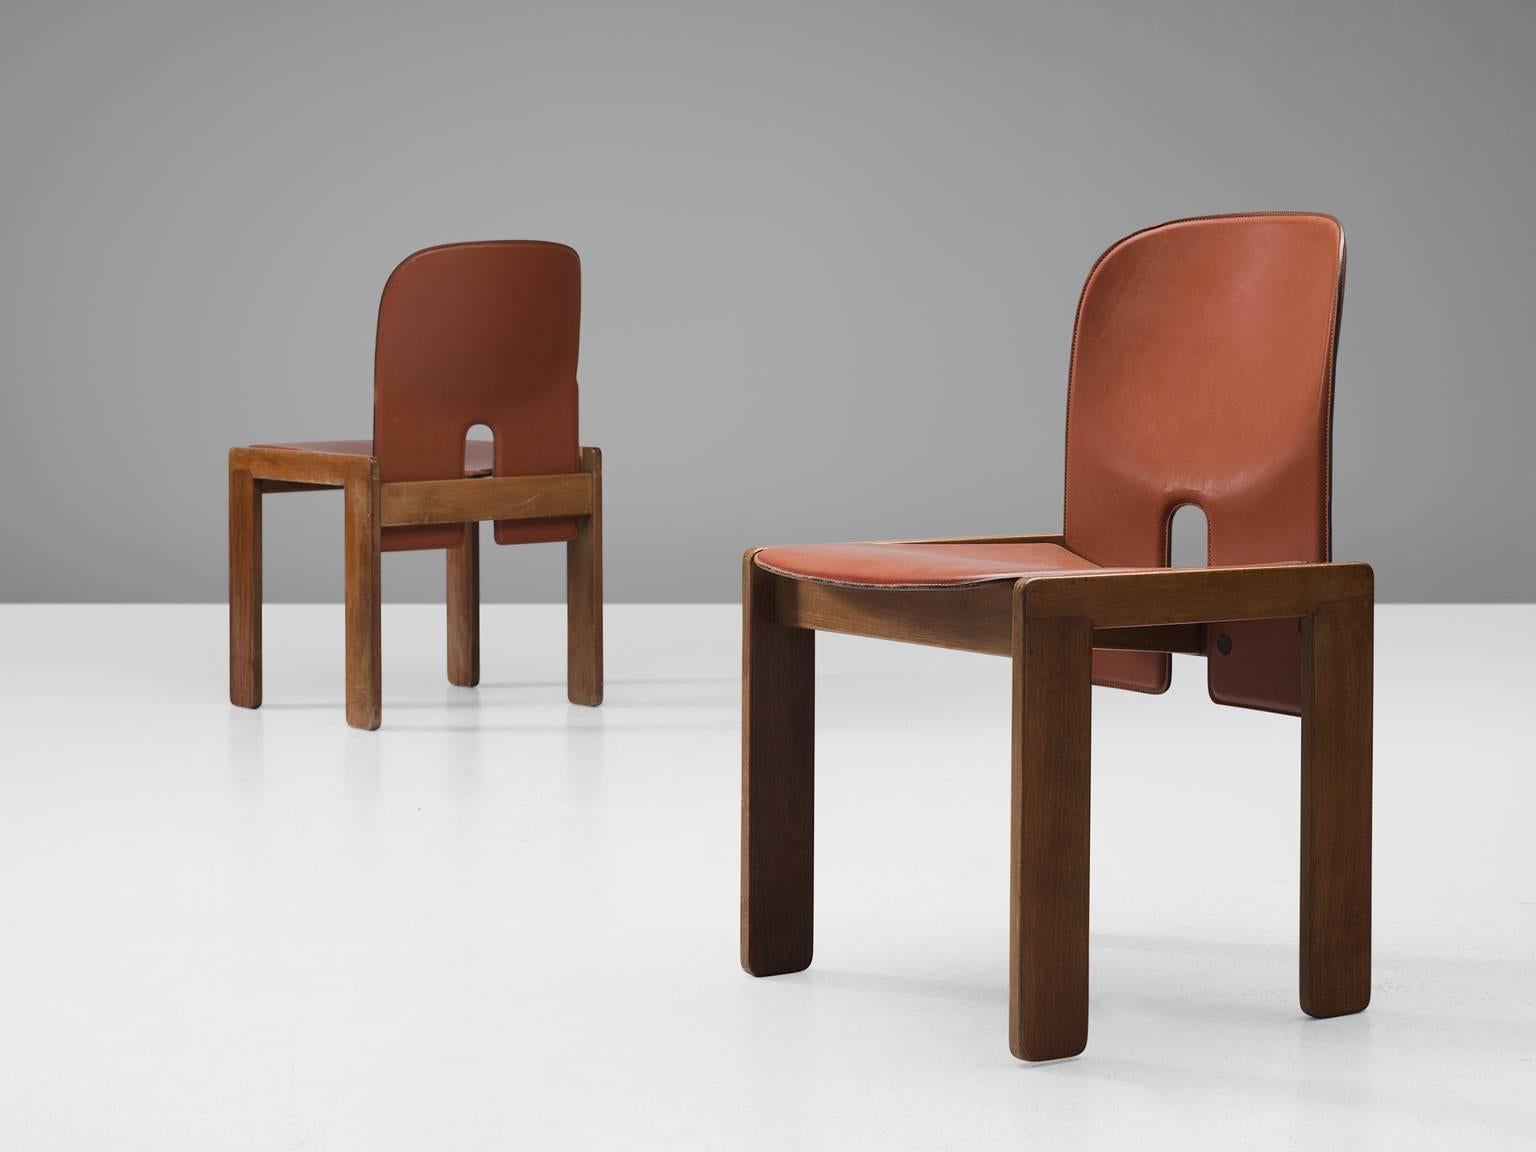 Italian Afra & Tobia Scarpa Chairs in Brick Red Leather and Walnut for Cassina